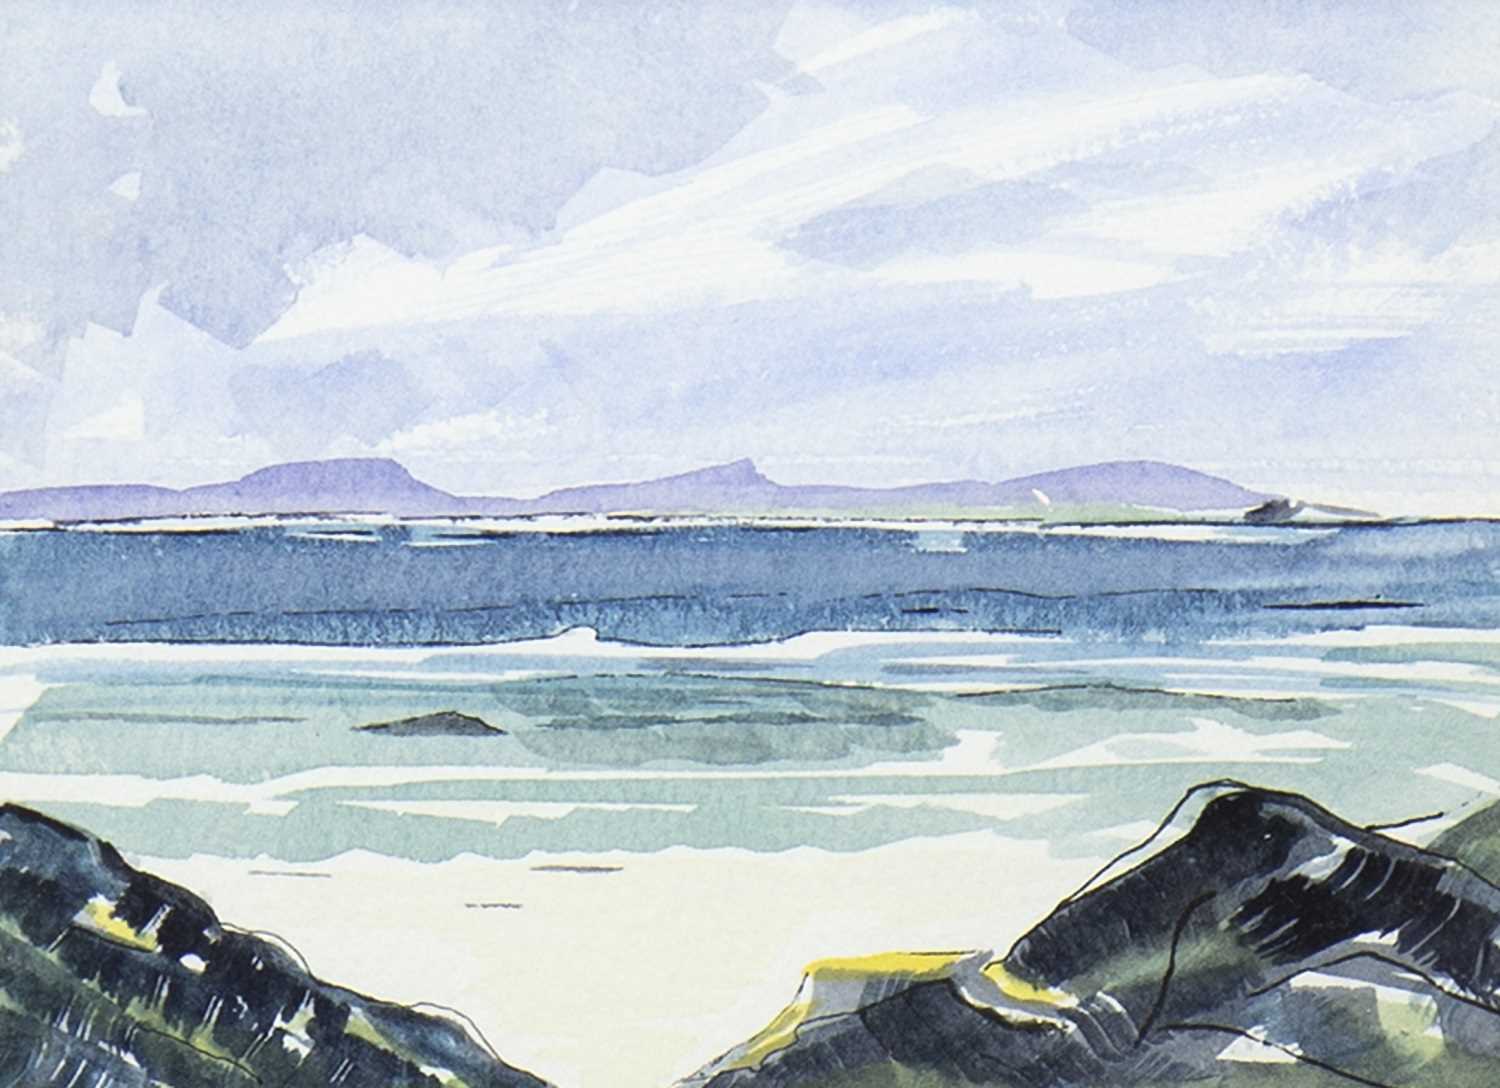 Lot 642 - VIEW FROM THE SHORE, A WATERCOLOUR